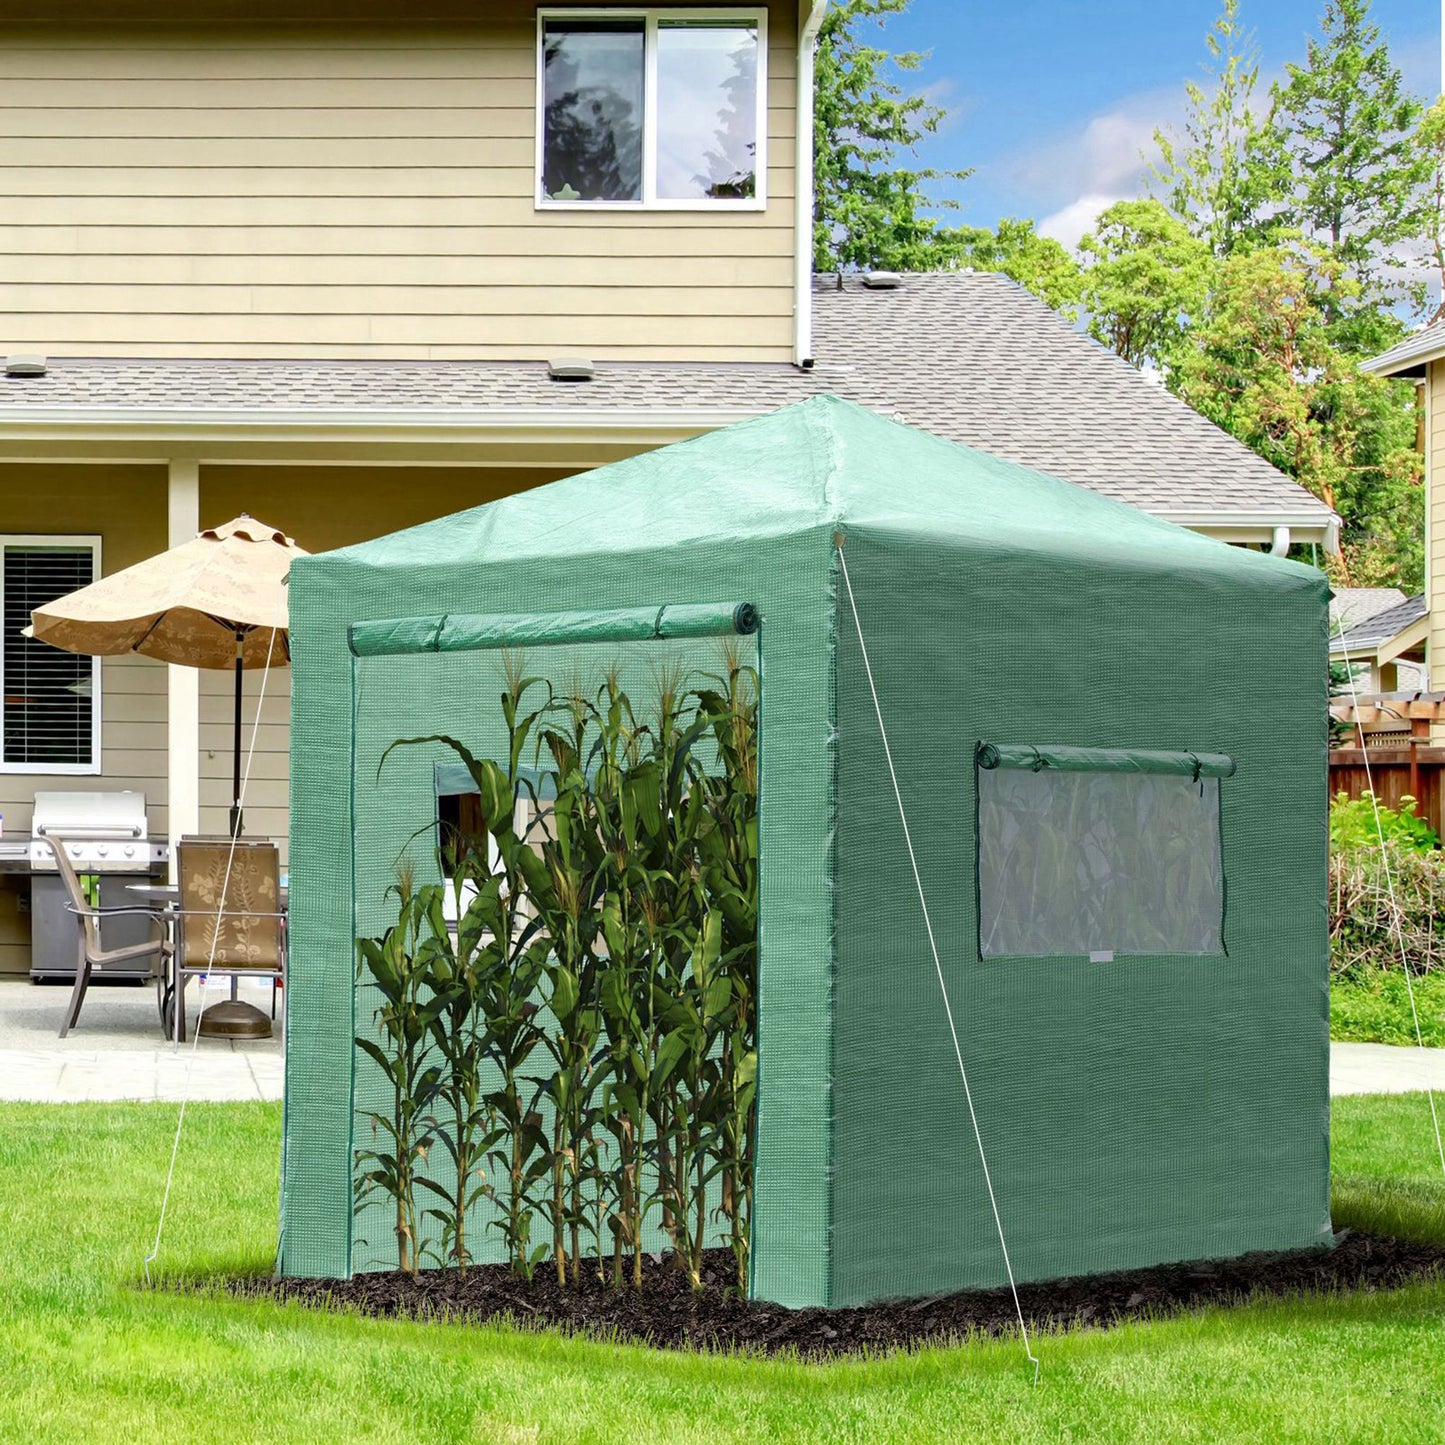 Outsunny Portable Walk in Greenhouse with Roll-up Door Windows Outdoor Foldable 2 x 2 x 2m